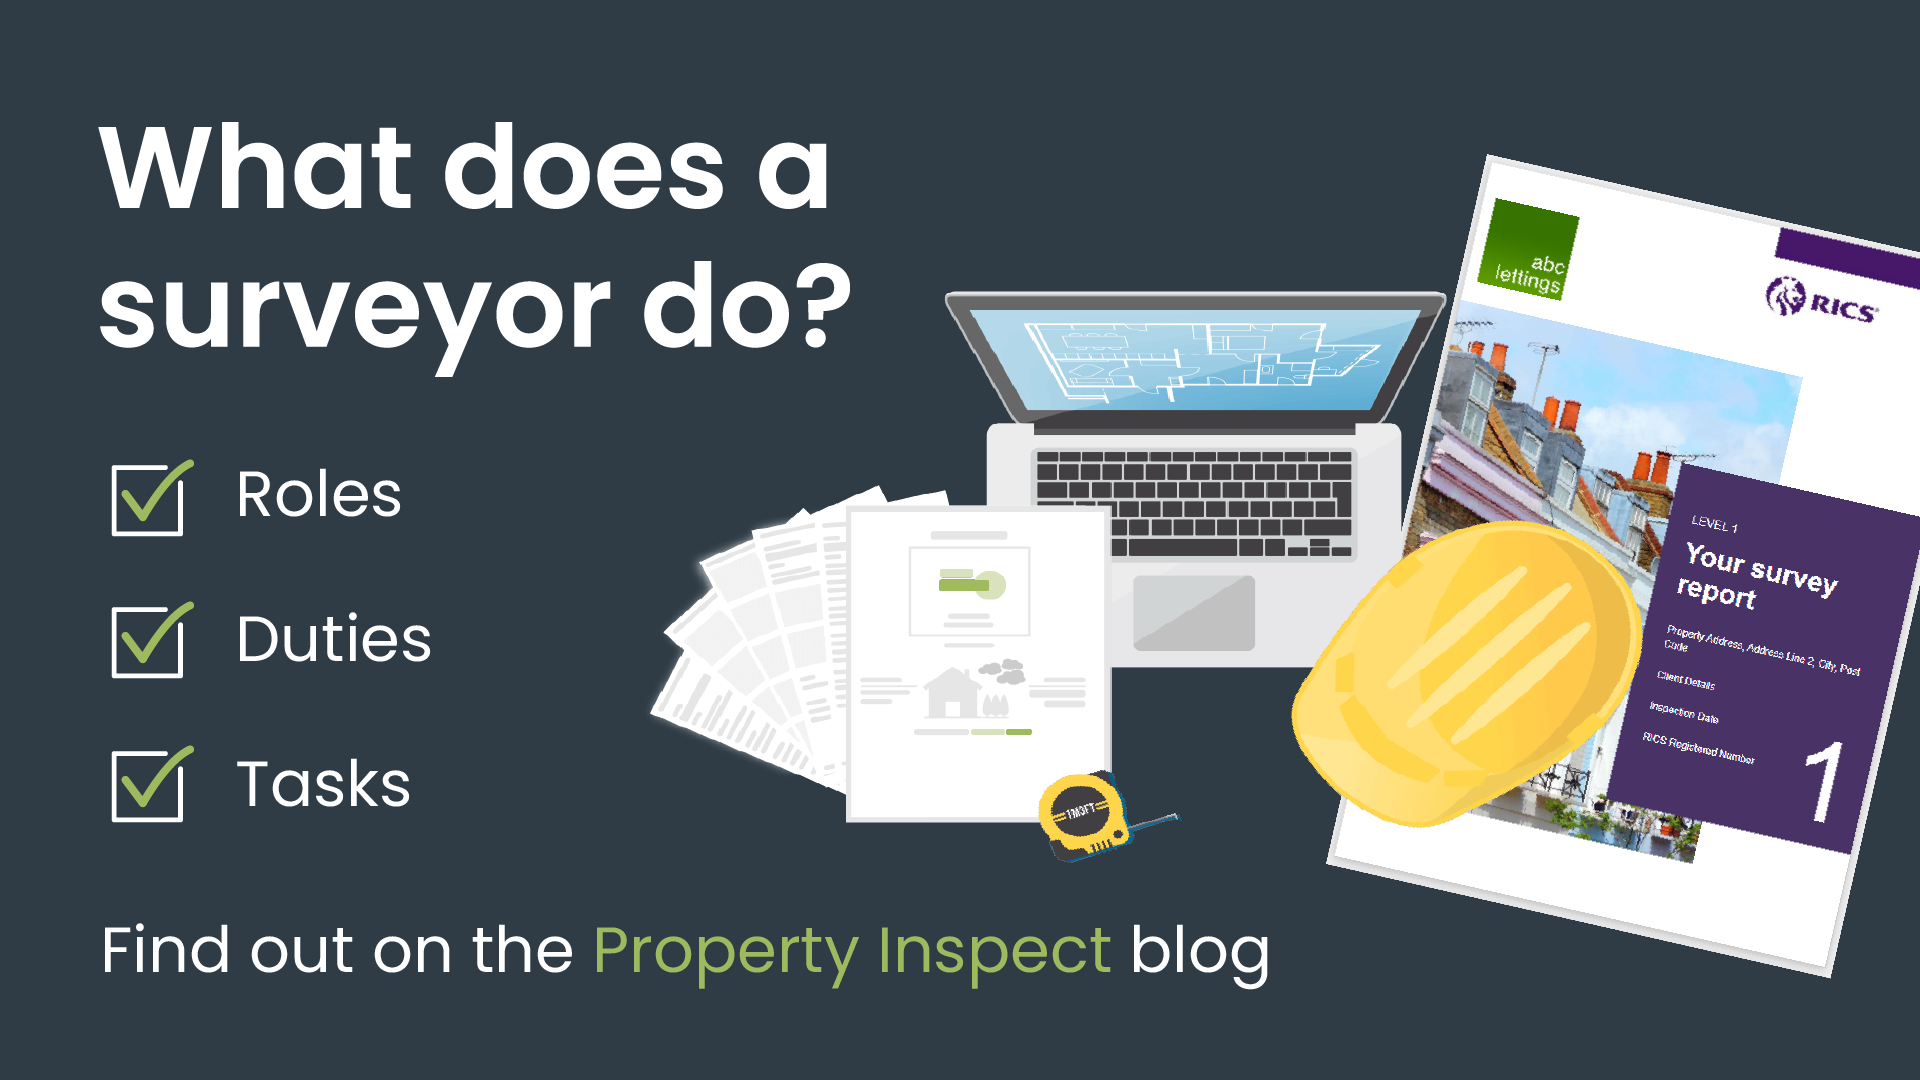 What does a surveyor do?